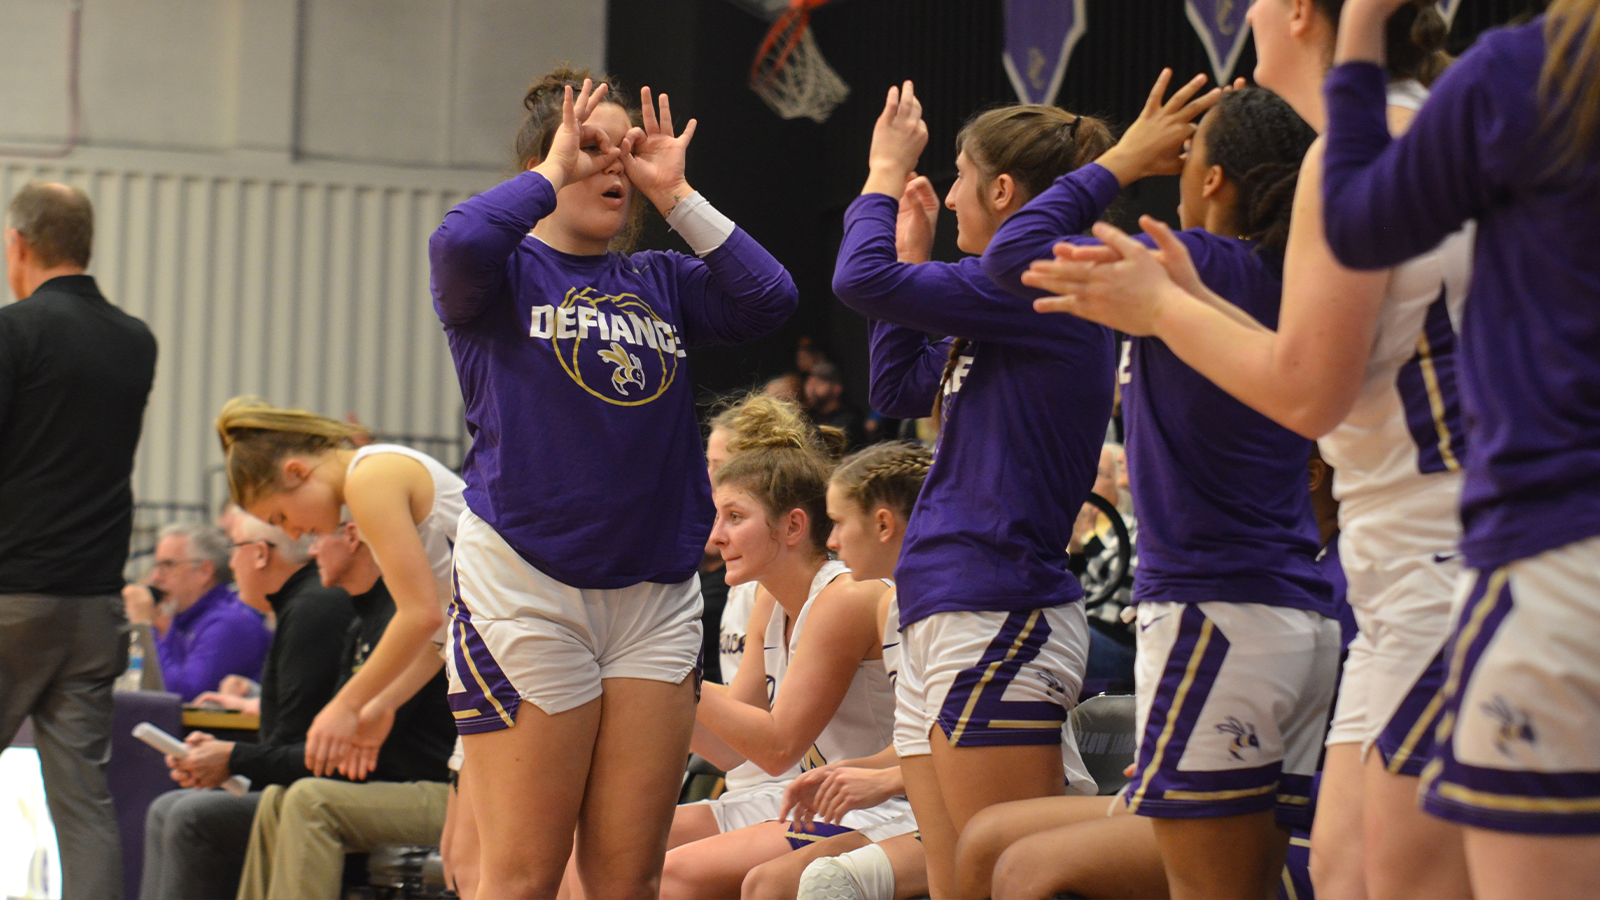 WBB Preview: Yellow Jackets hit the road looking to end slide